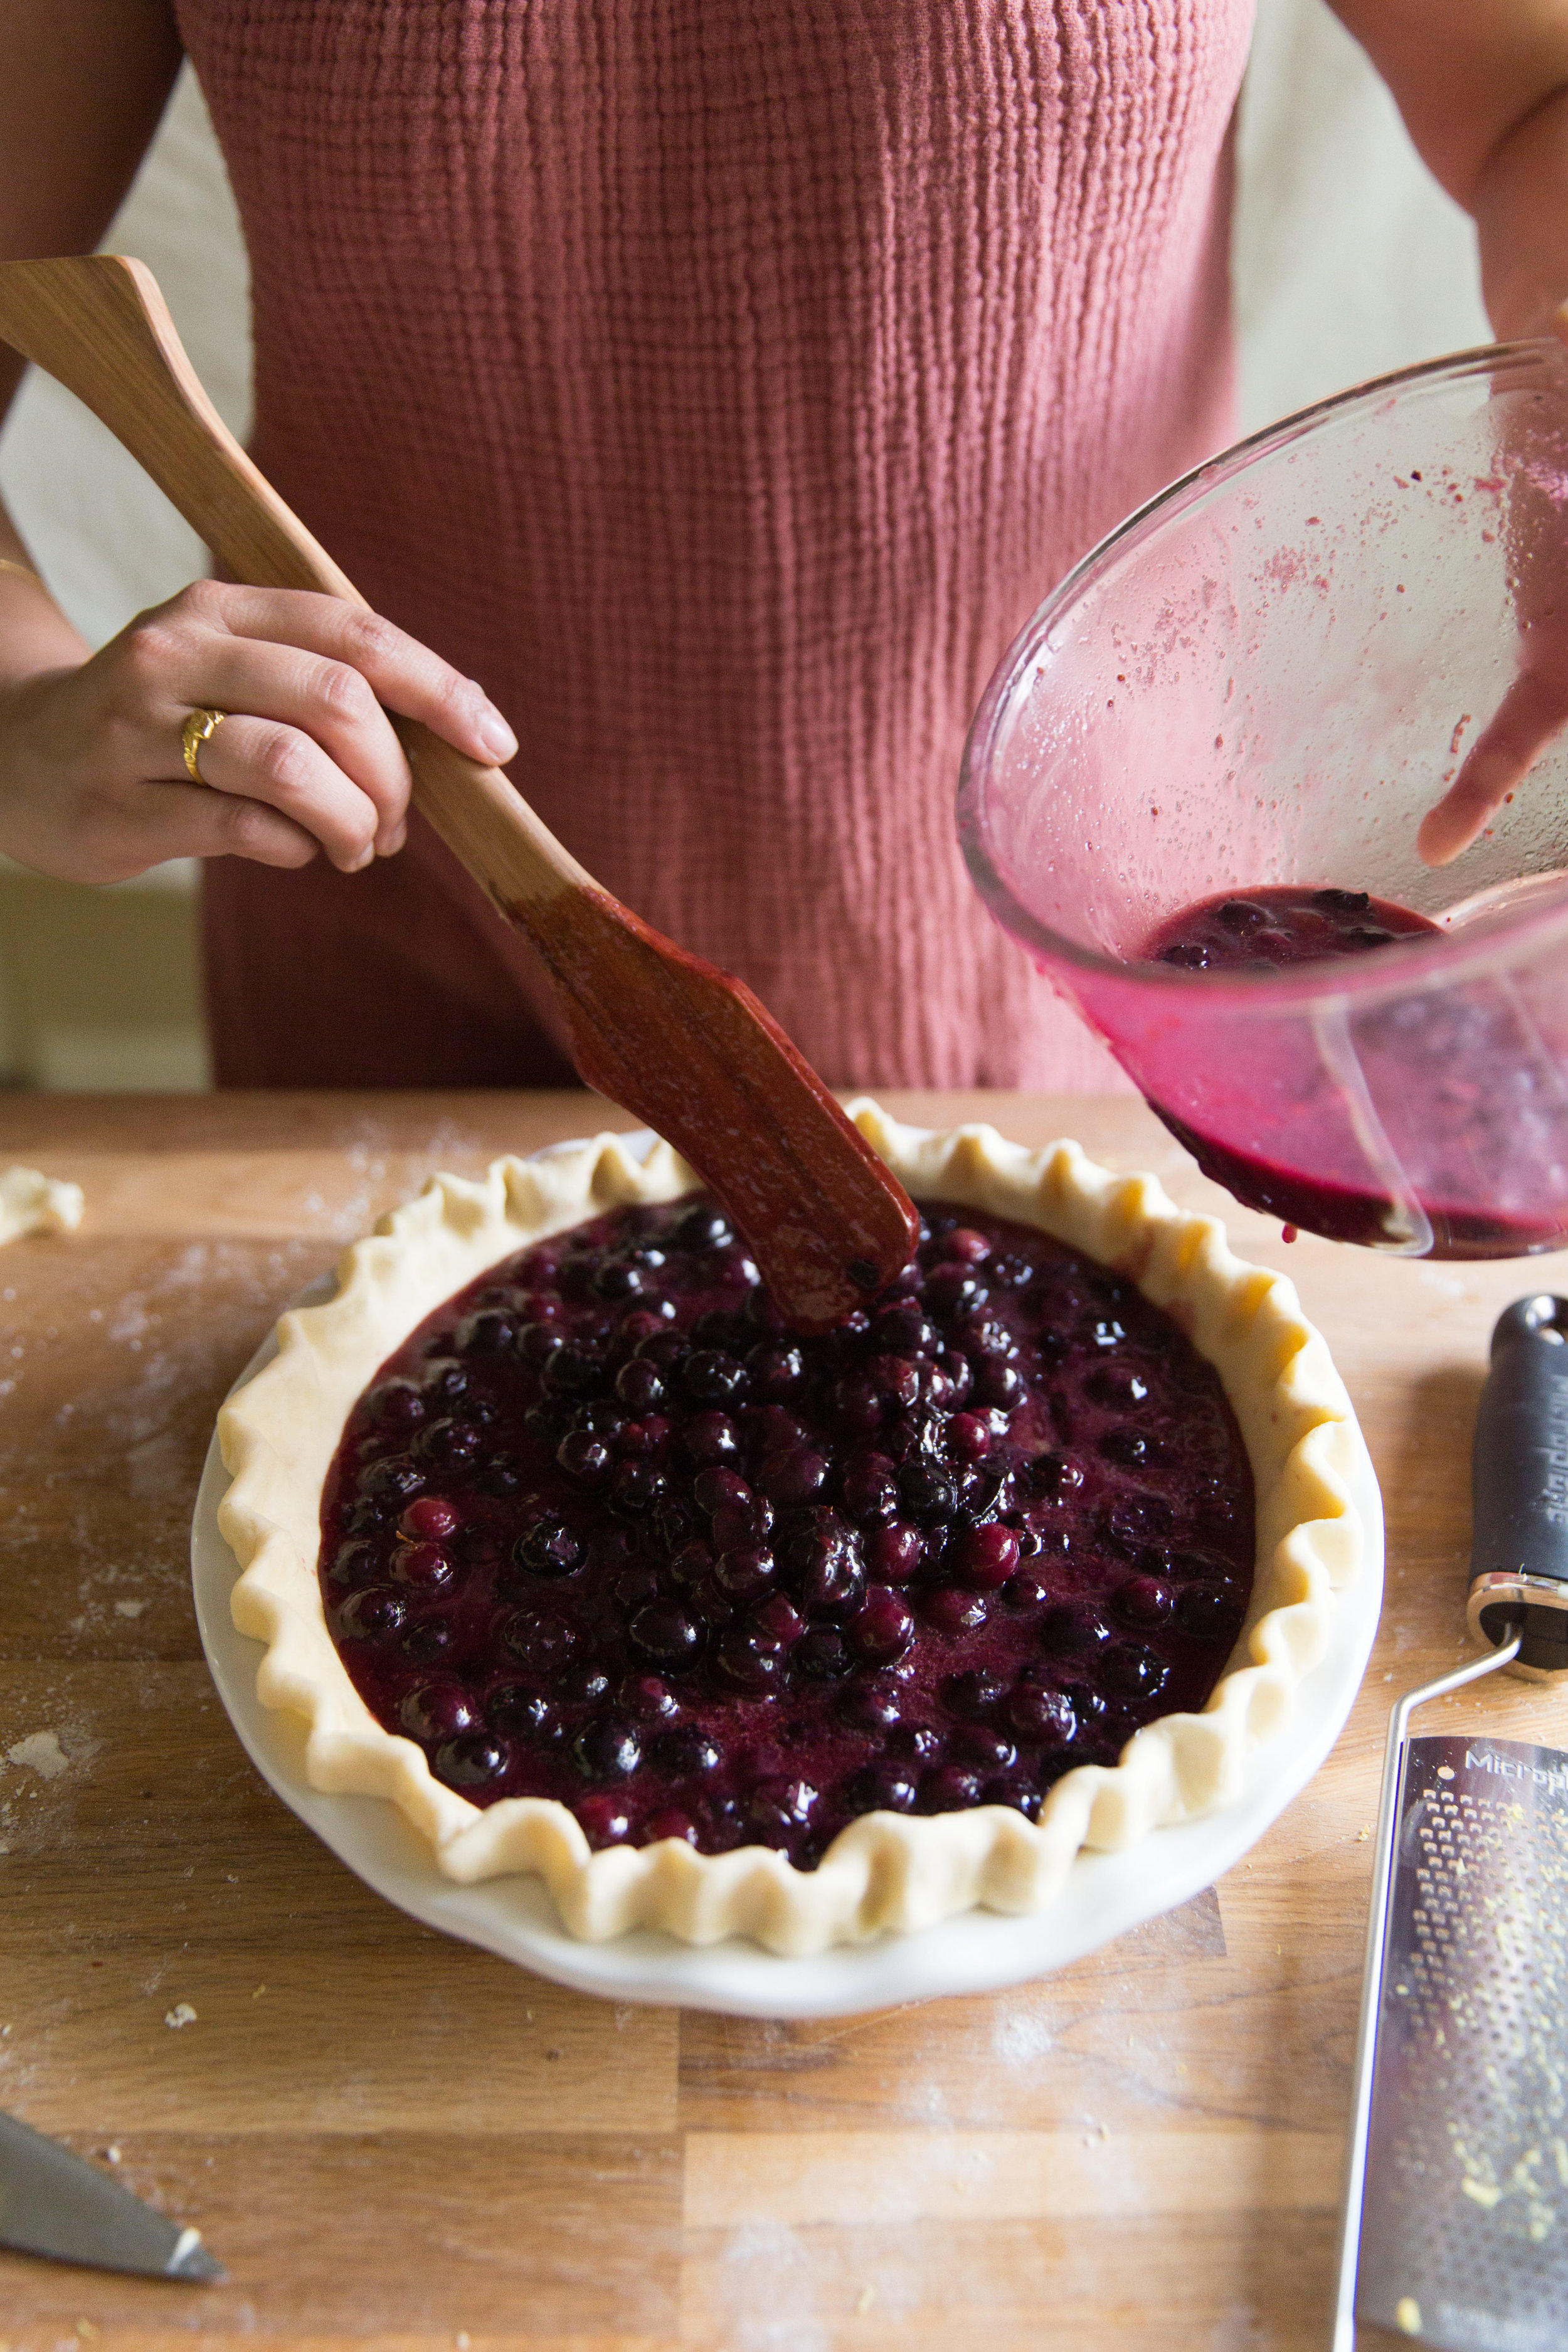 Pouring Blueberry Filling Into Pie Crust